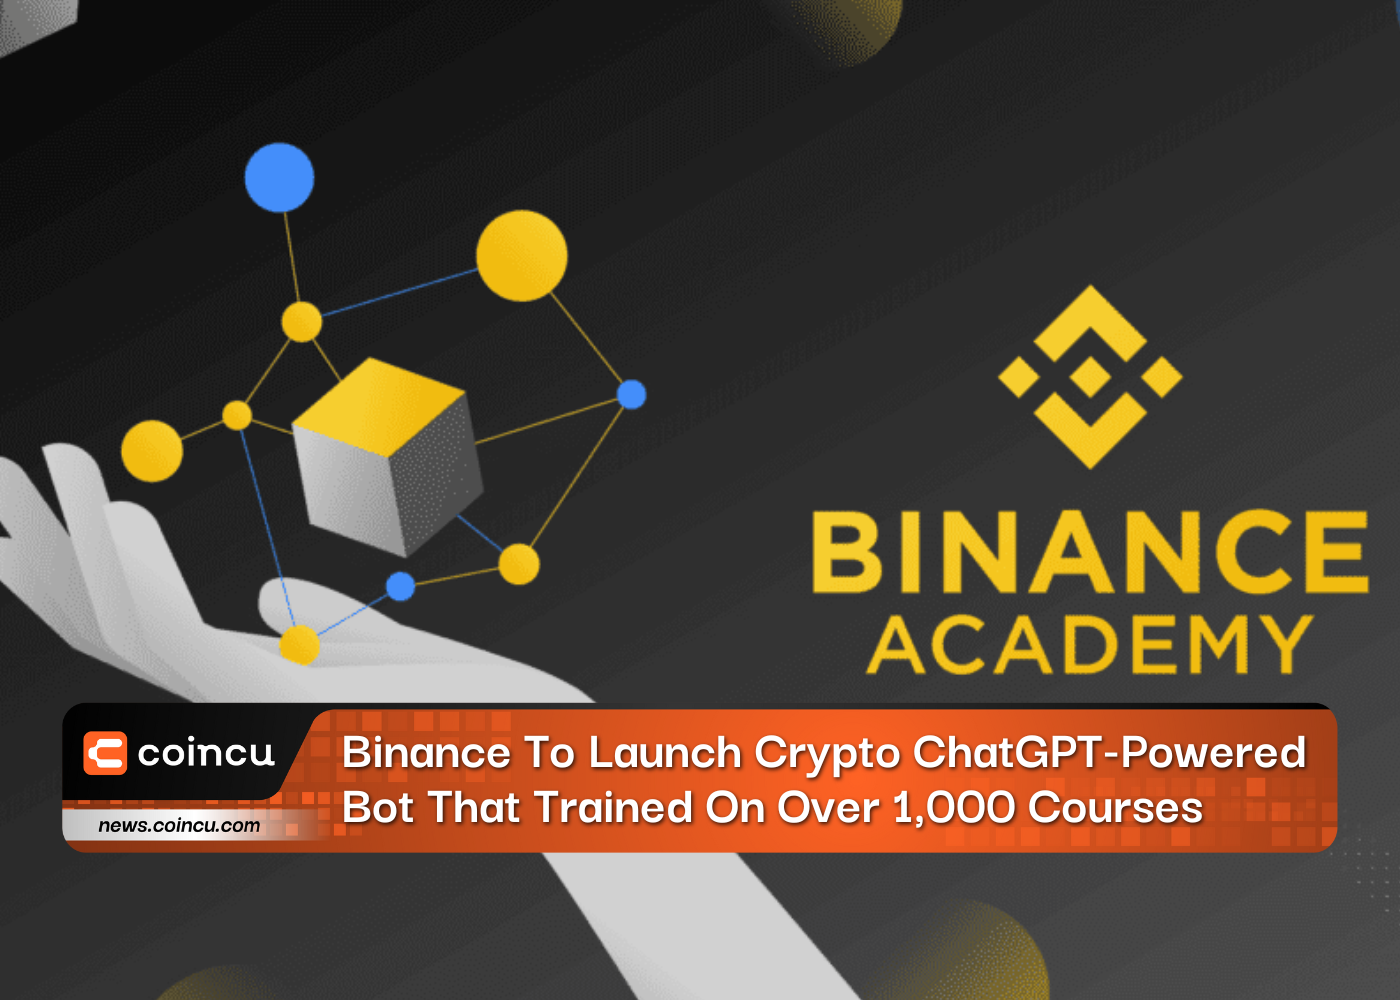 Binance To Launch Crypto ChatGPT-Powered Bot That Trained On Over 1,000 Courses